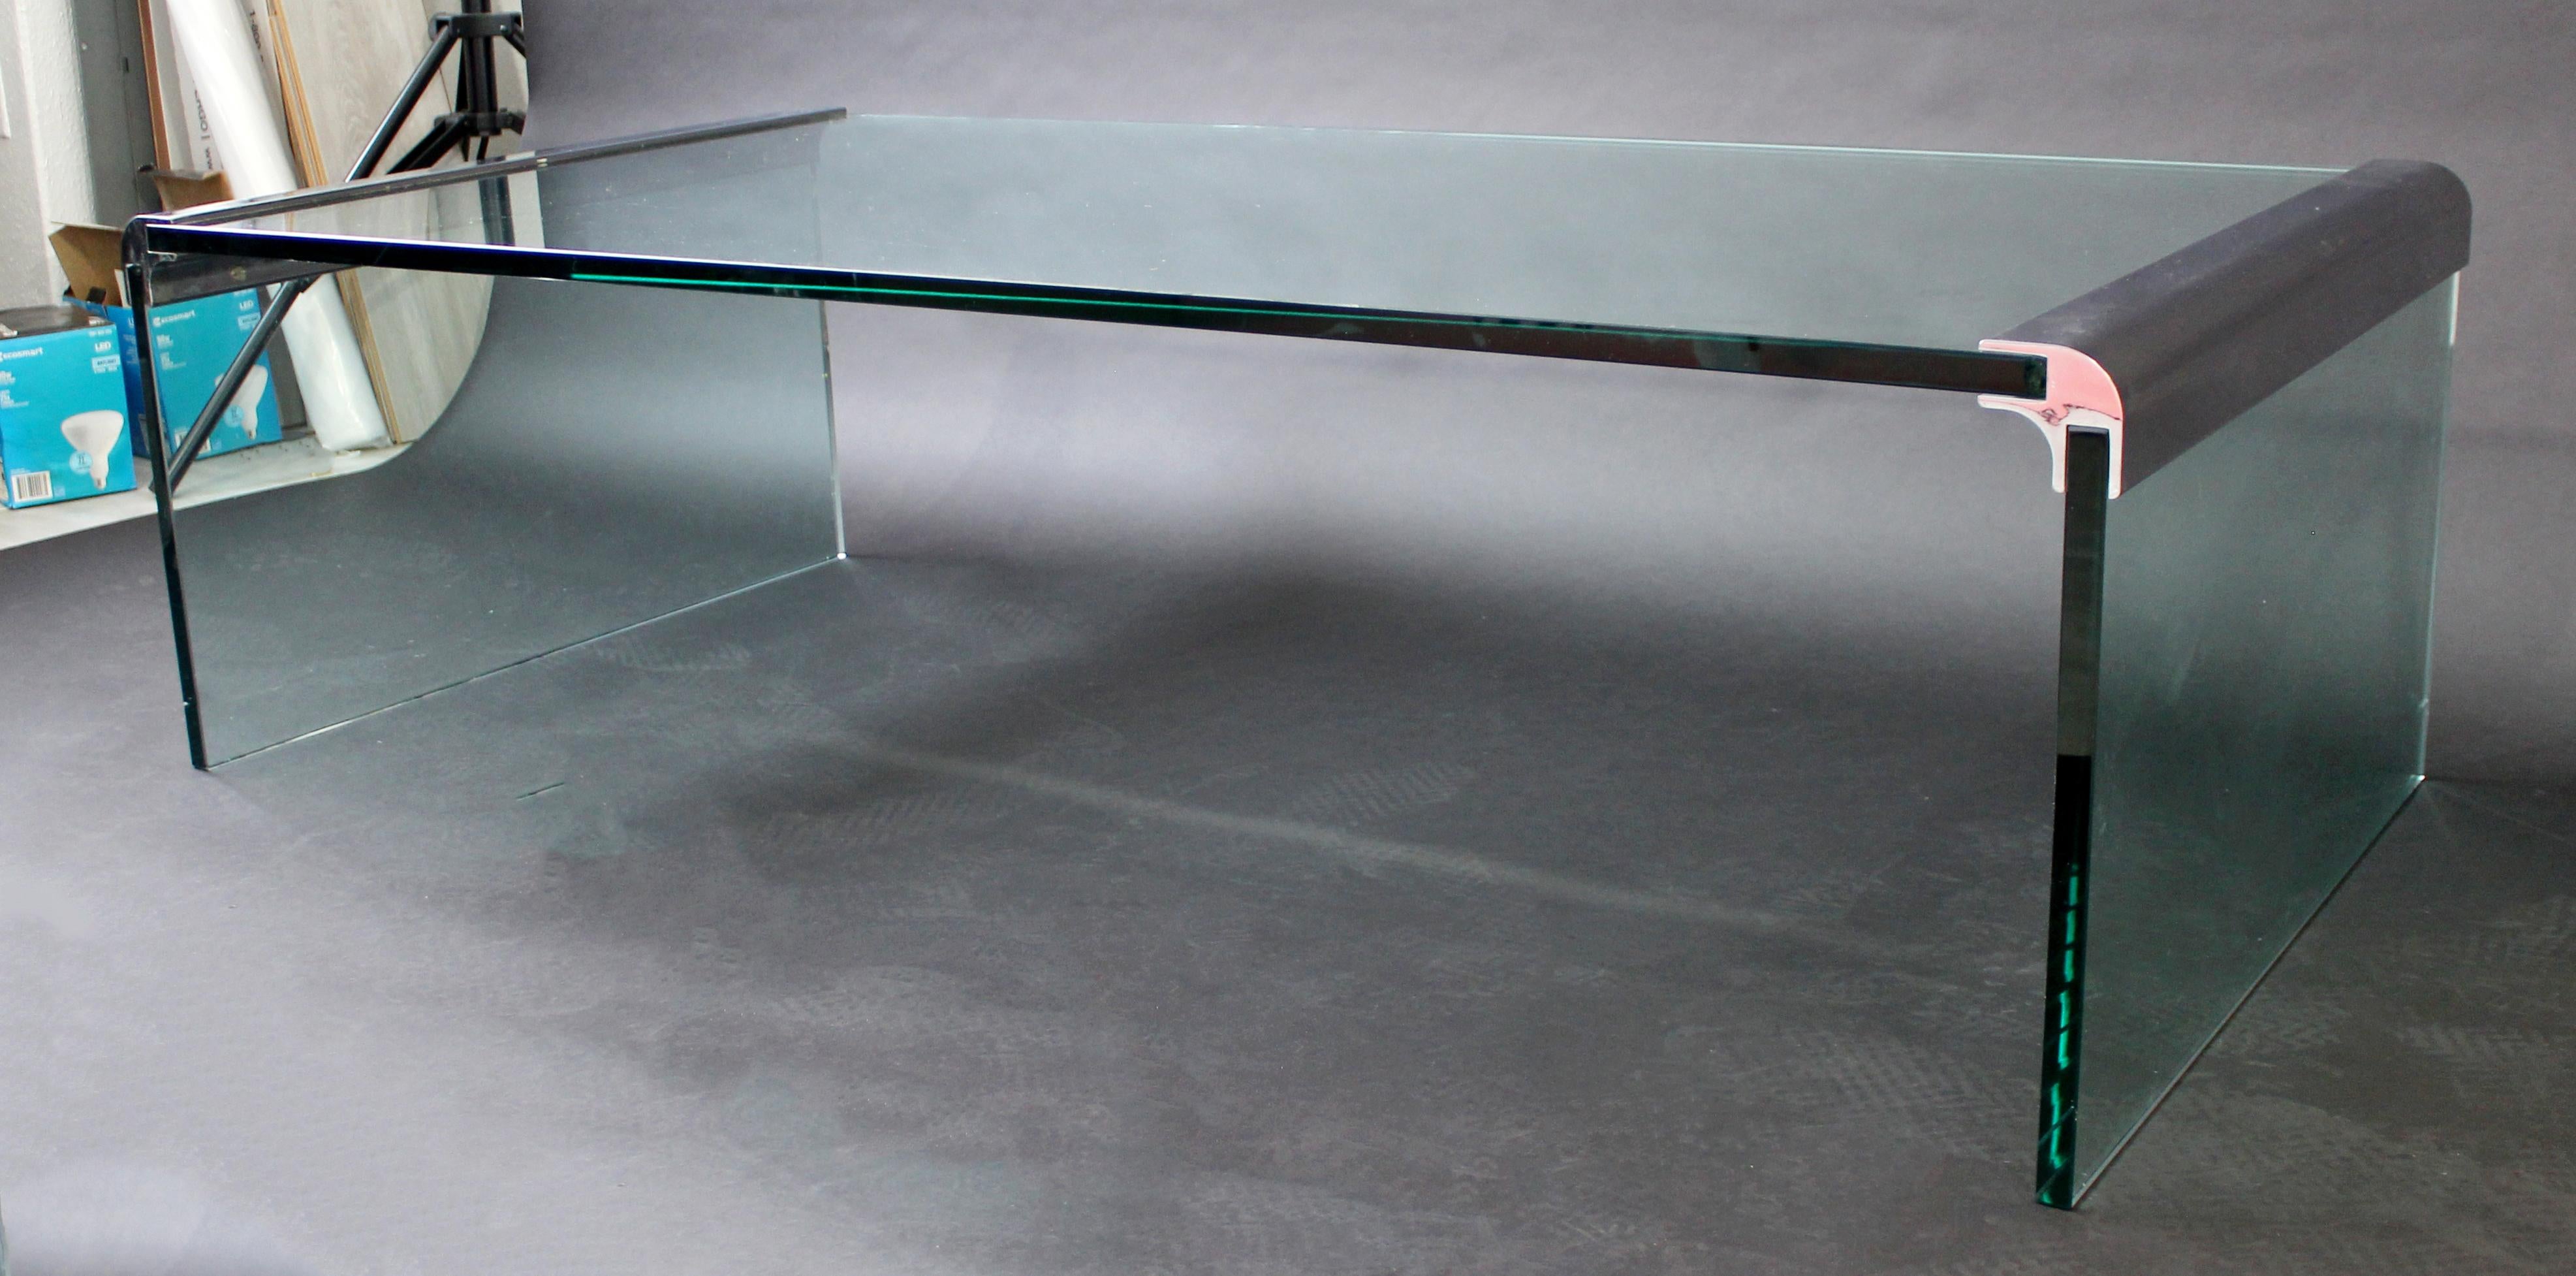 Late 20th Century Mid-Century Modern Pace Waterfall Coffee Table Chrome & Glass, 1970s